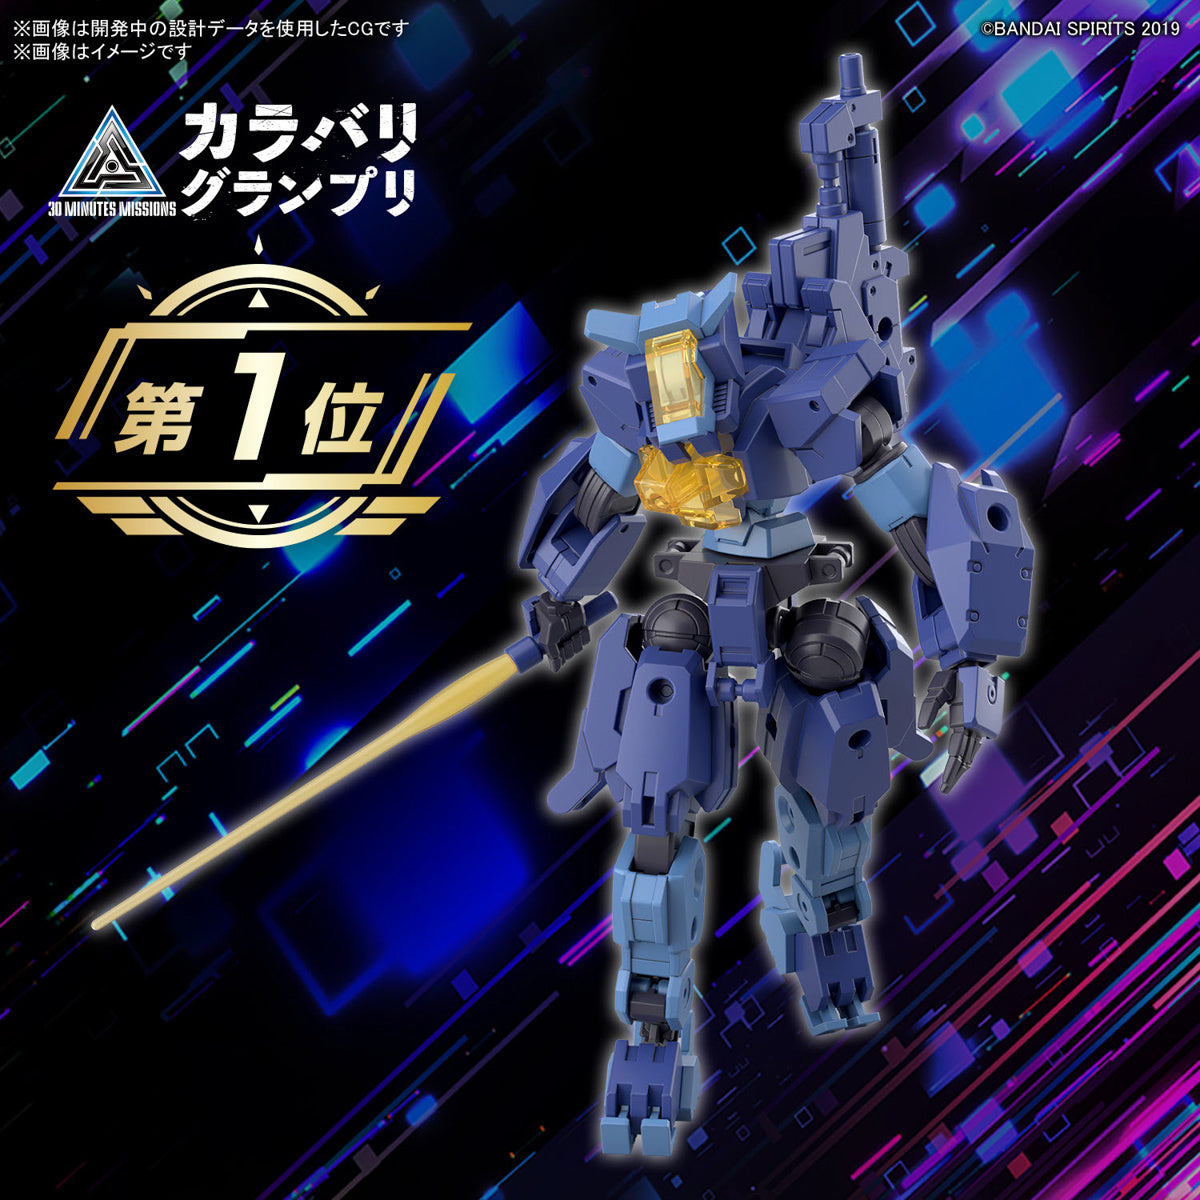 1/144 30 Minutes Missions eEXM-S03H Forestieri 03